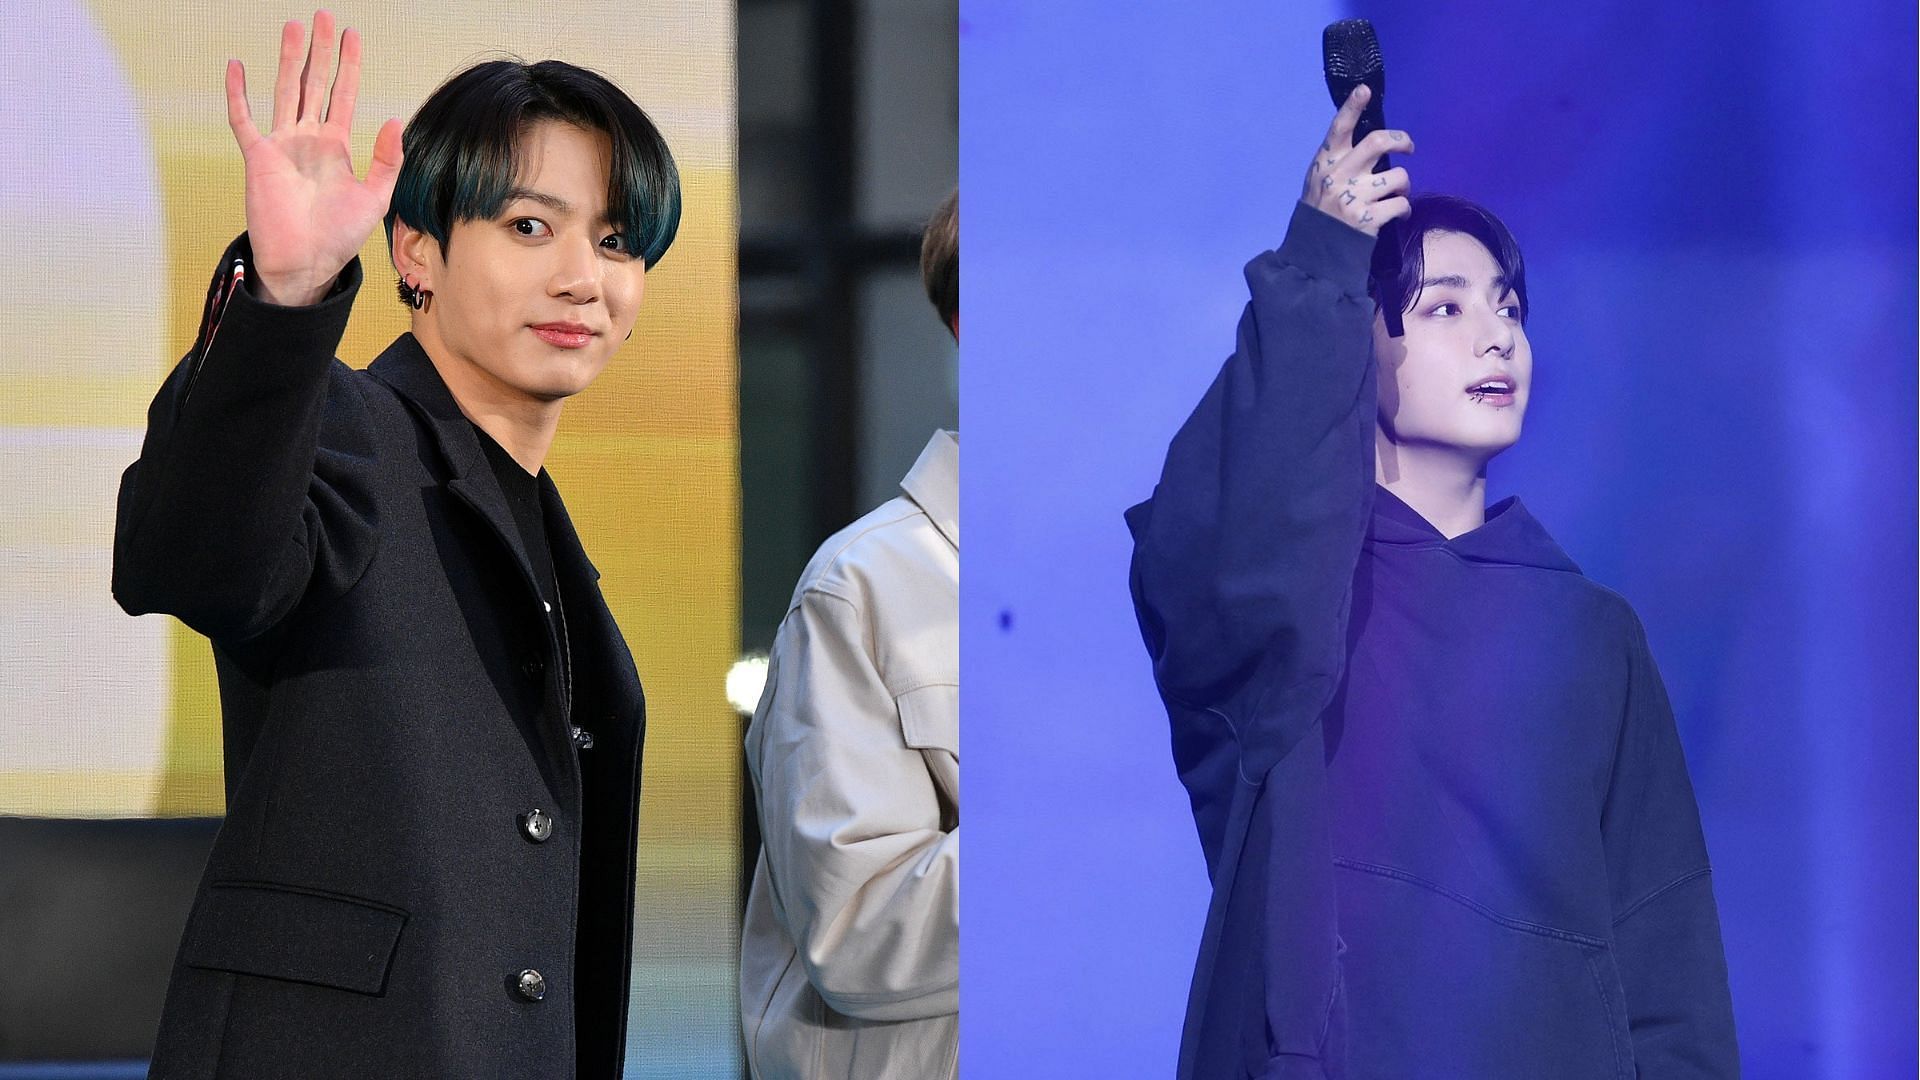 Jungkook is crowned as the most loved K-pop idol 2023 by Gaon/Circle chart (Images via Twitter/Channel955 and Bangtan7_Stream)